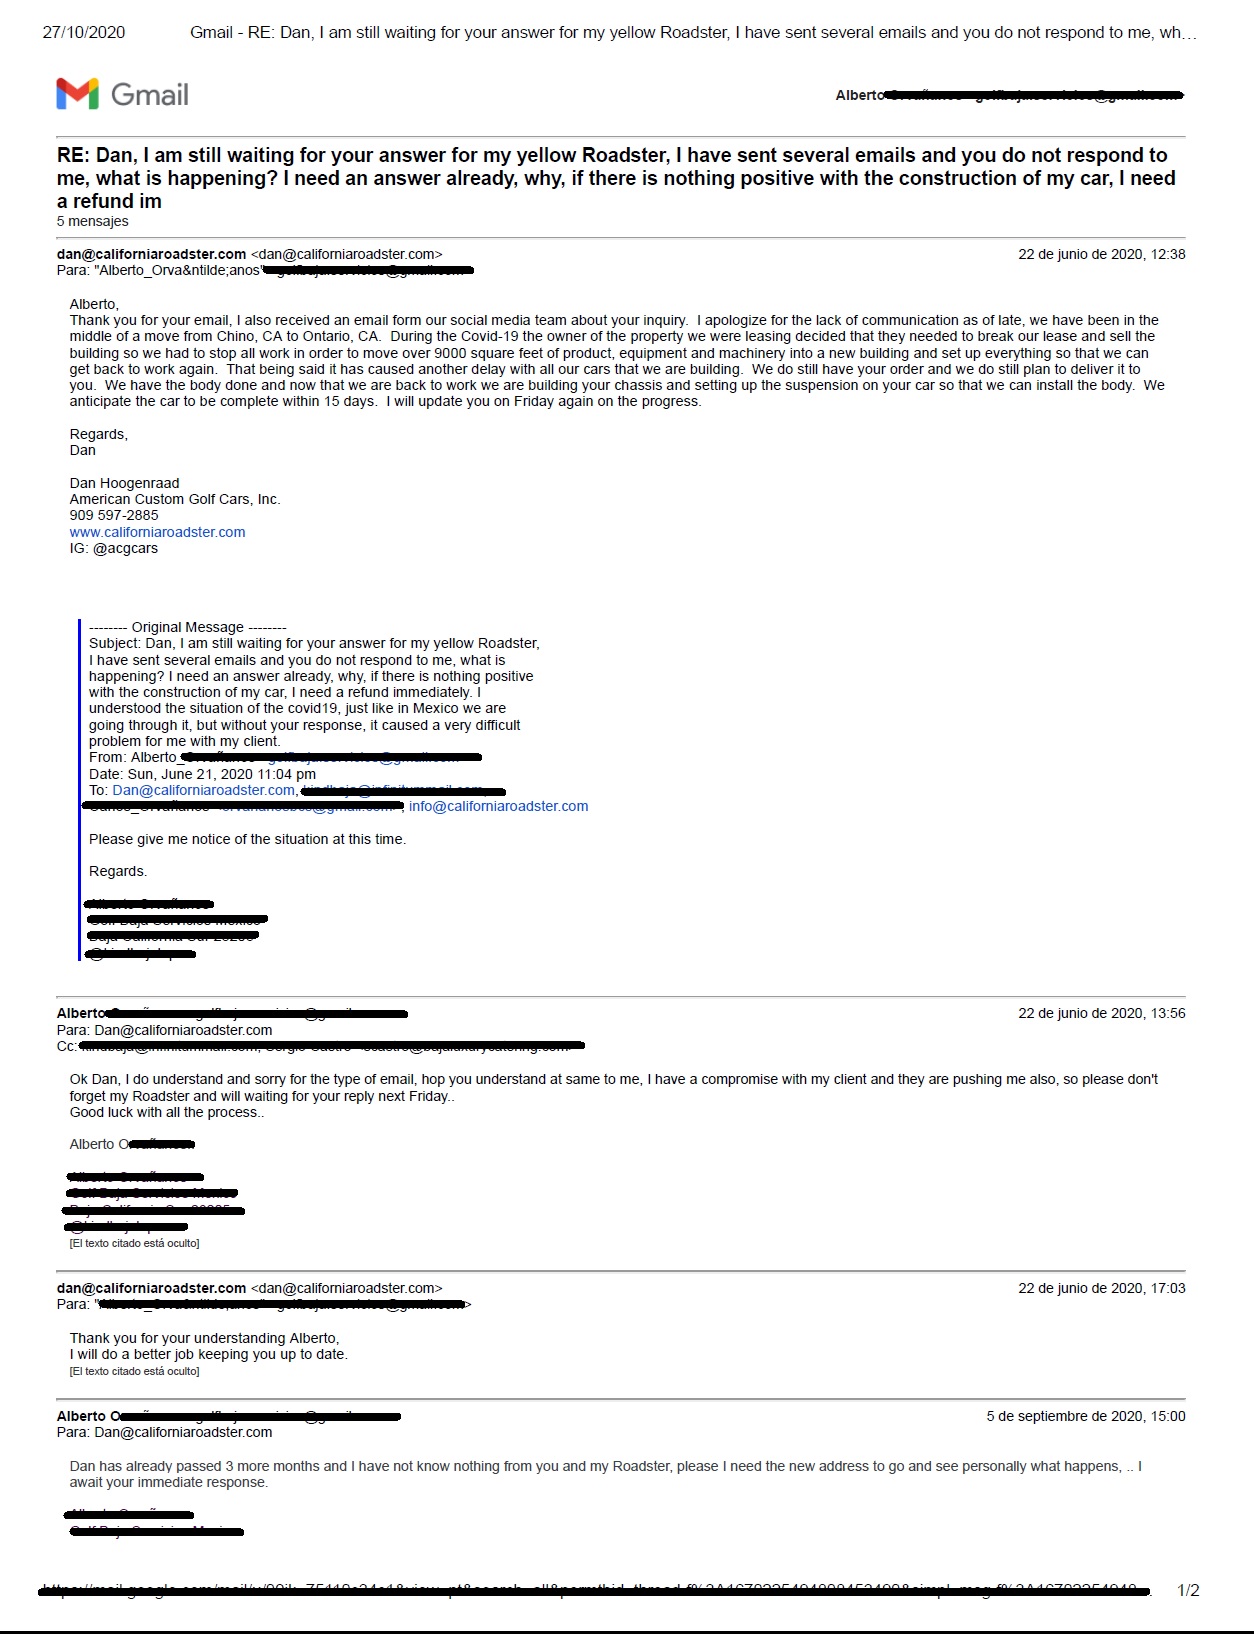 June 22nd, last email answered by Dan Hoogenraad 